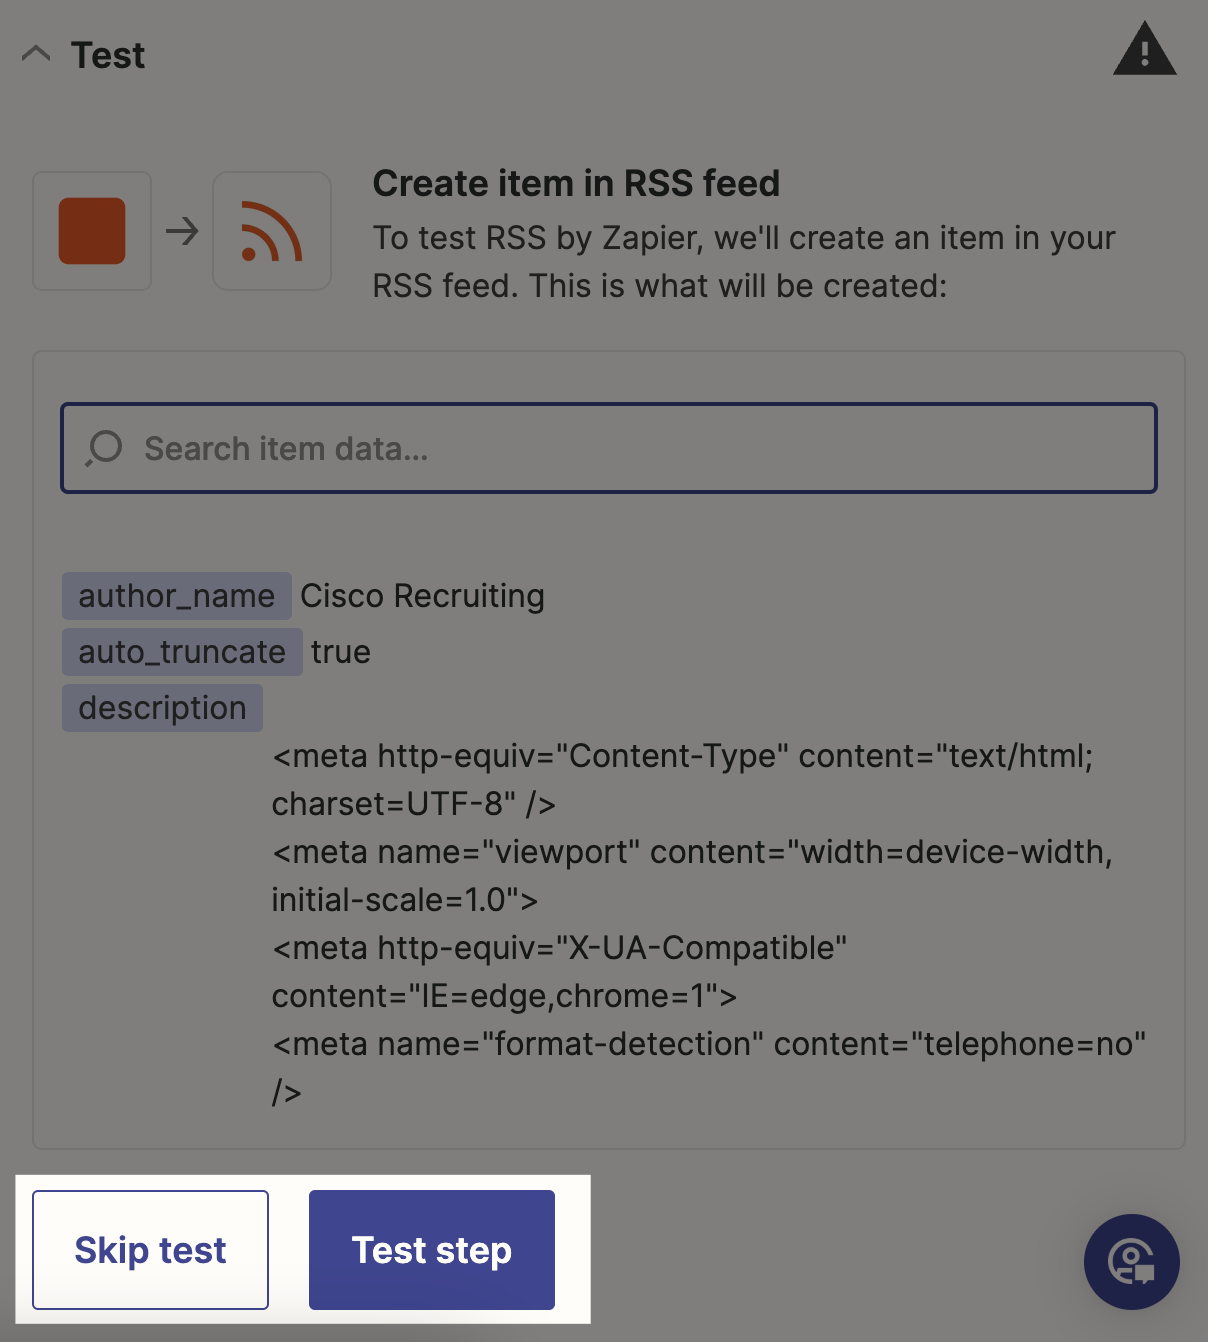 A screenshot of the test RSS by Zapier step. An arrow is pointed to the Skip Test link, and a box highlights the testing buttons.